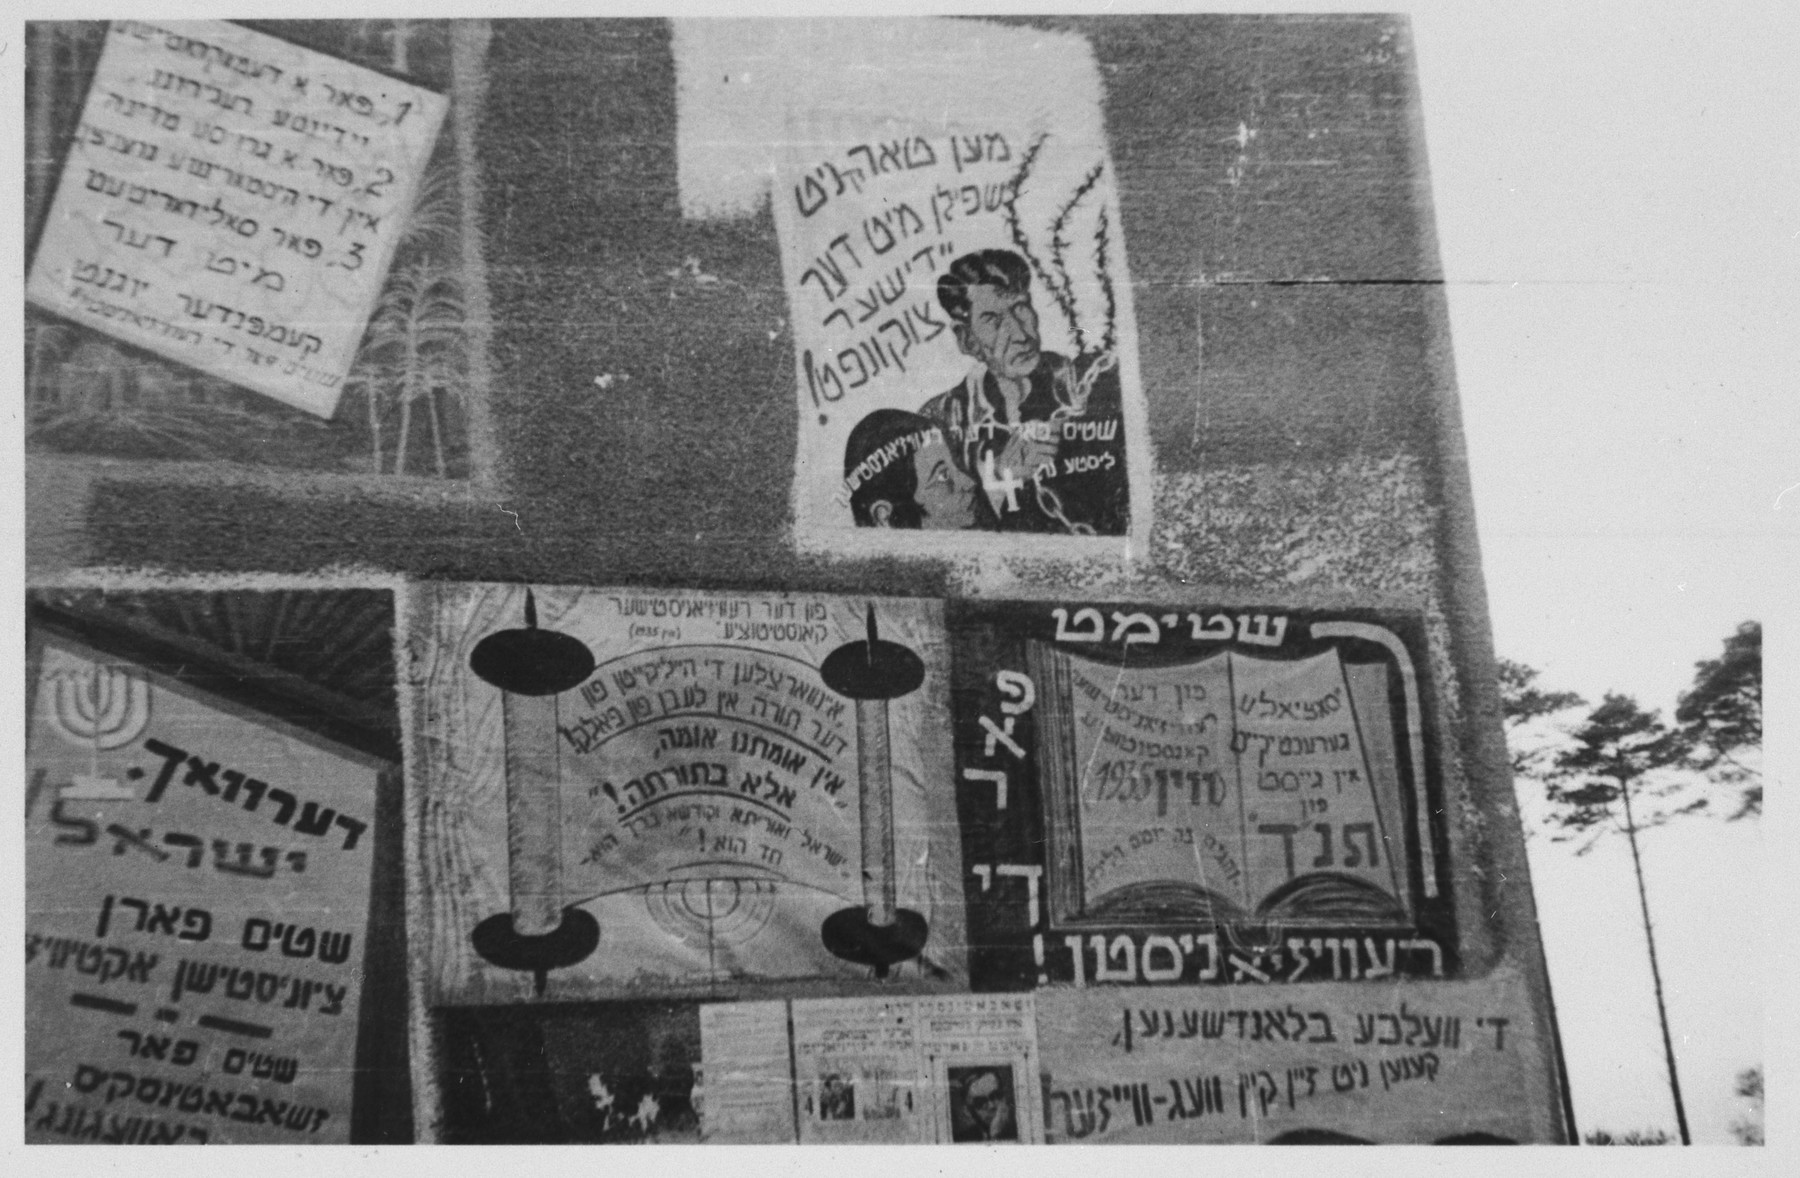 Assorted election signs are posted on the outside wall of a barracks in the Bergen-Belsen displaced persons camp.